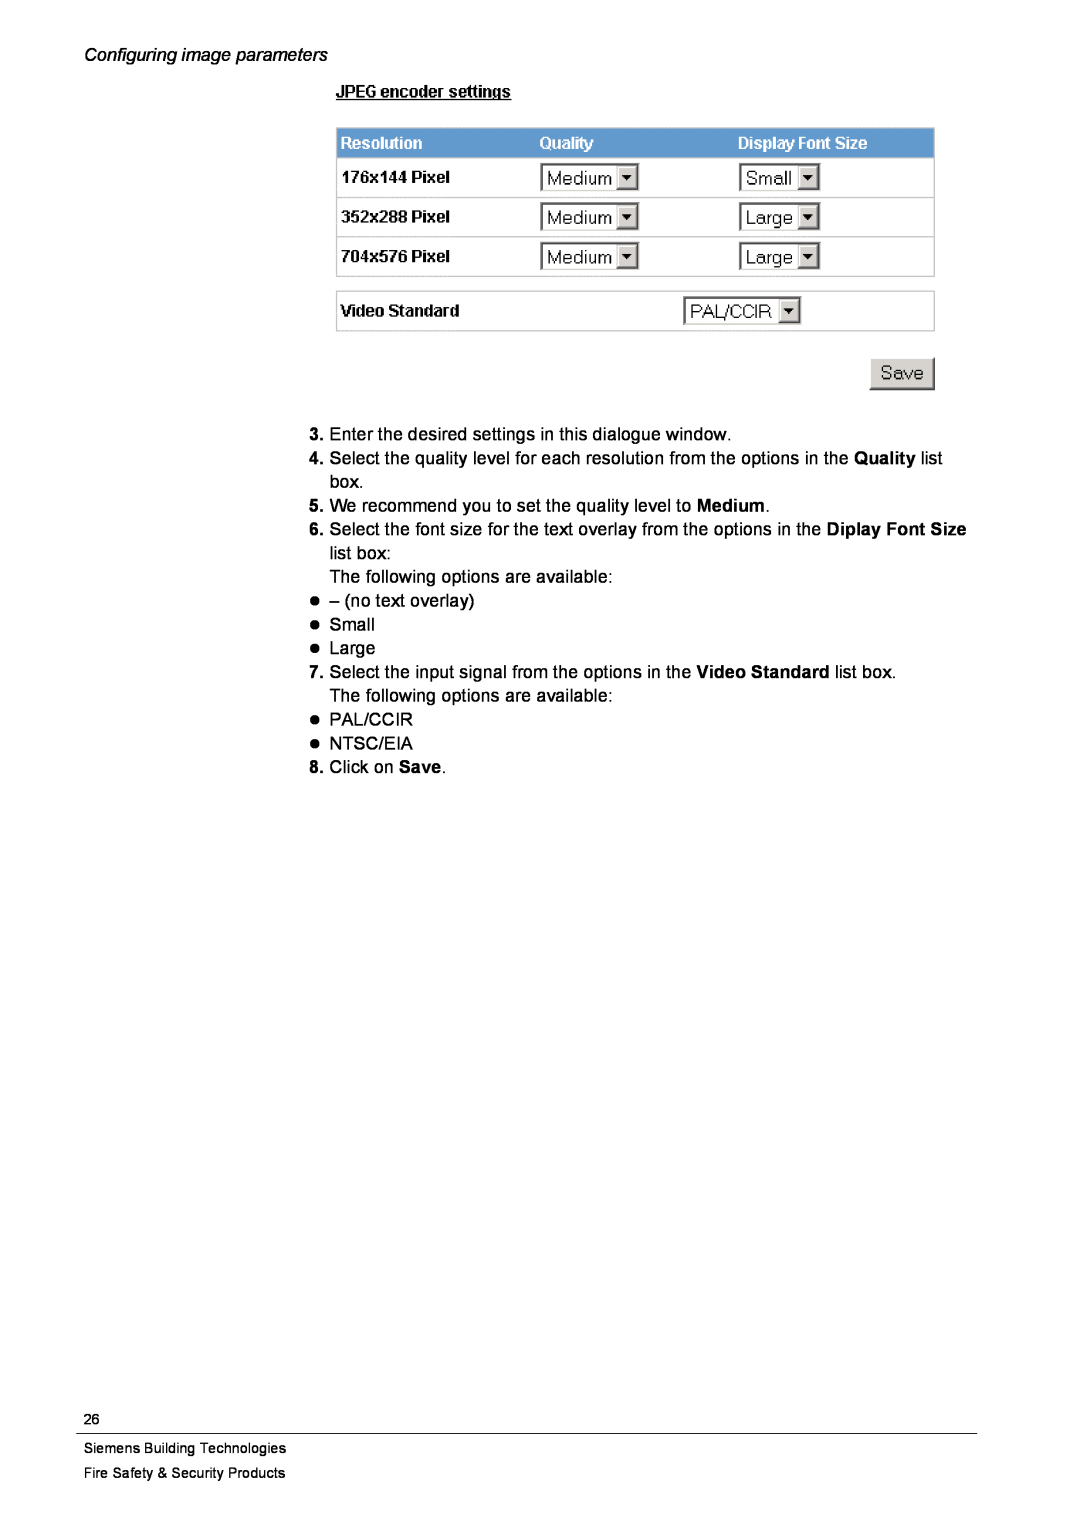 Siemens CFVA-IP user manual The following options are available 